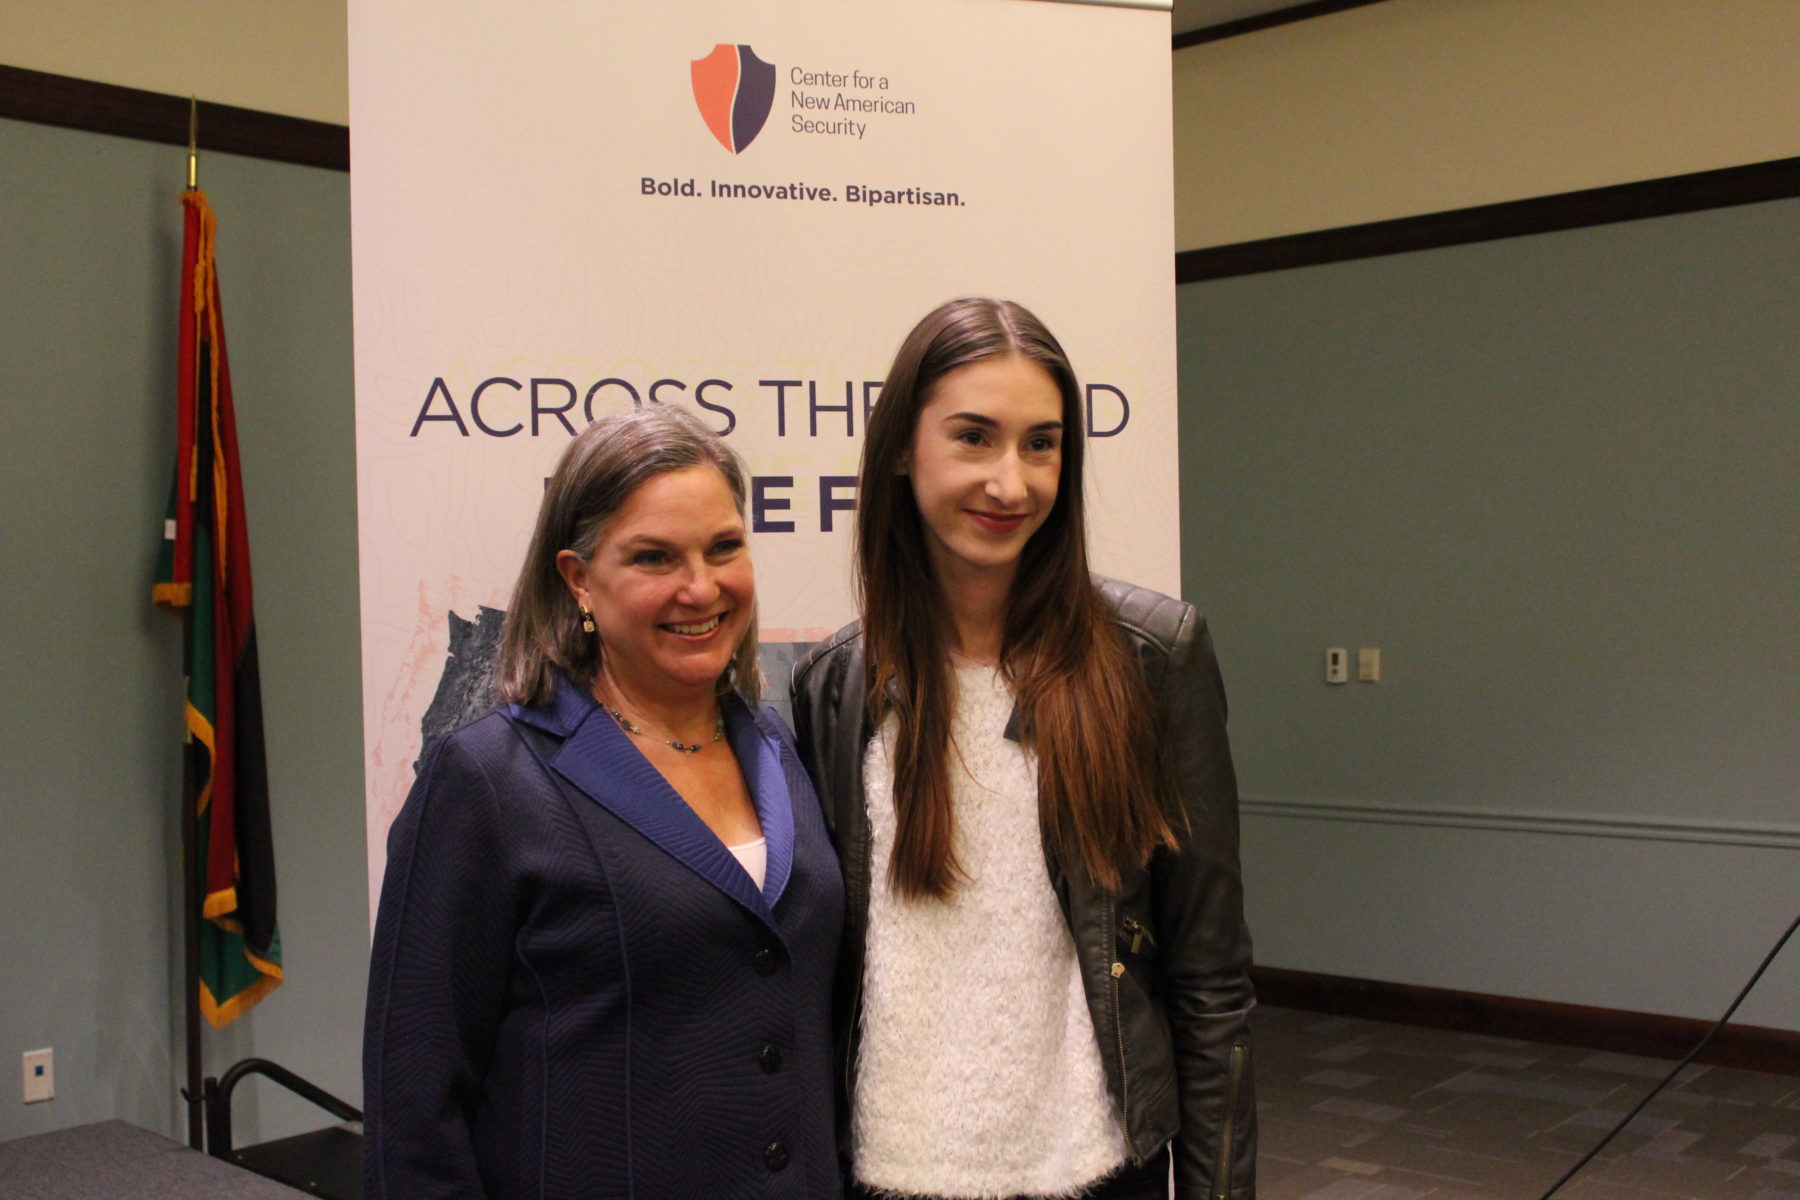 CANS CEO, Ambassador Toria Nuland, poses with a student who attended the public event in Tampa, Florida